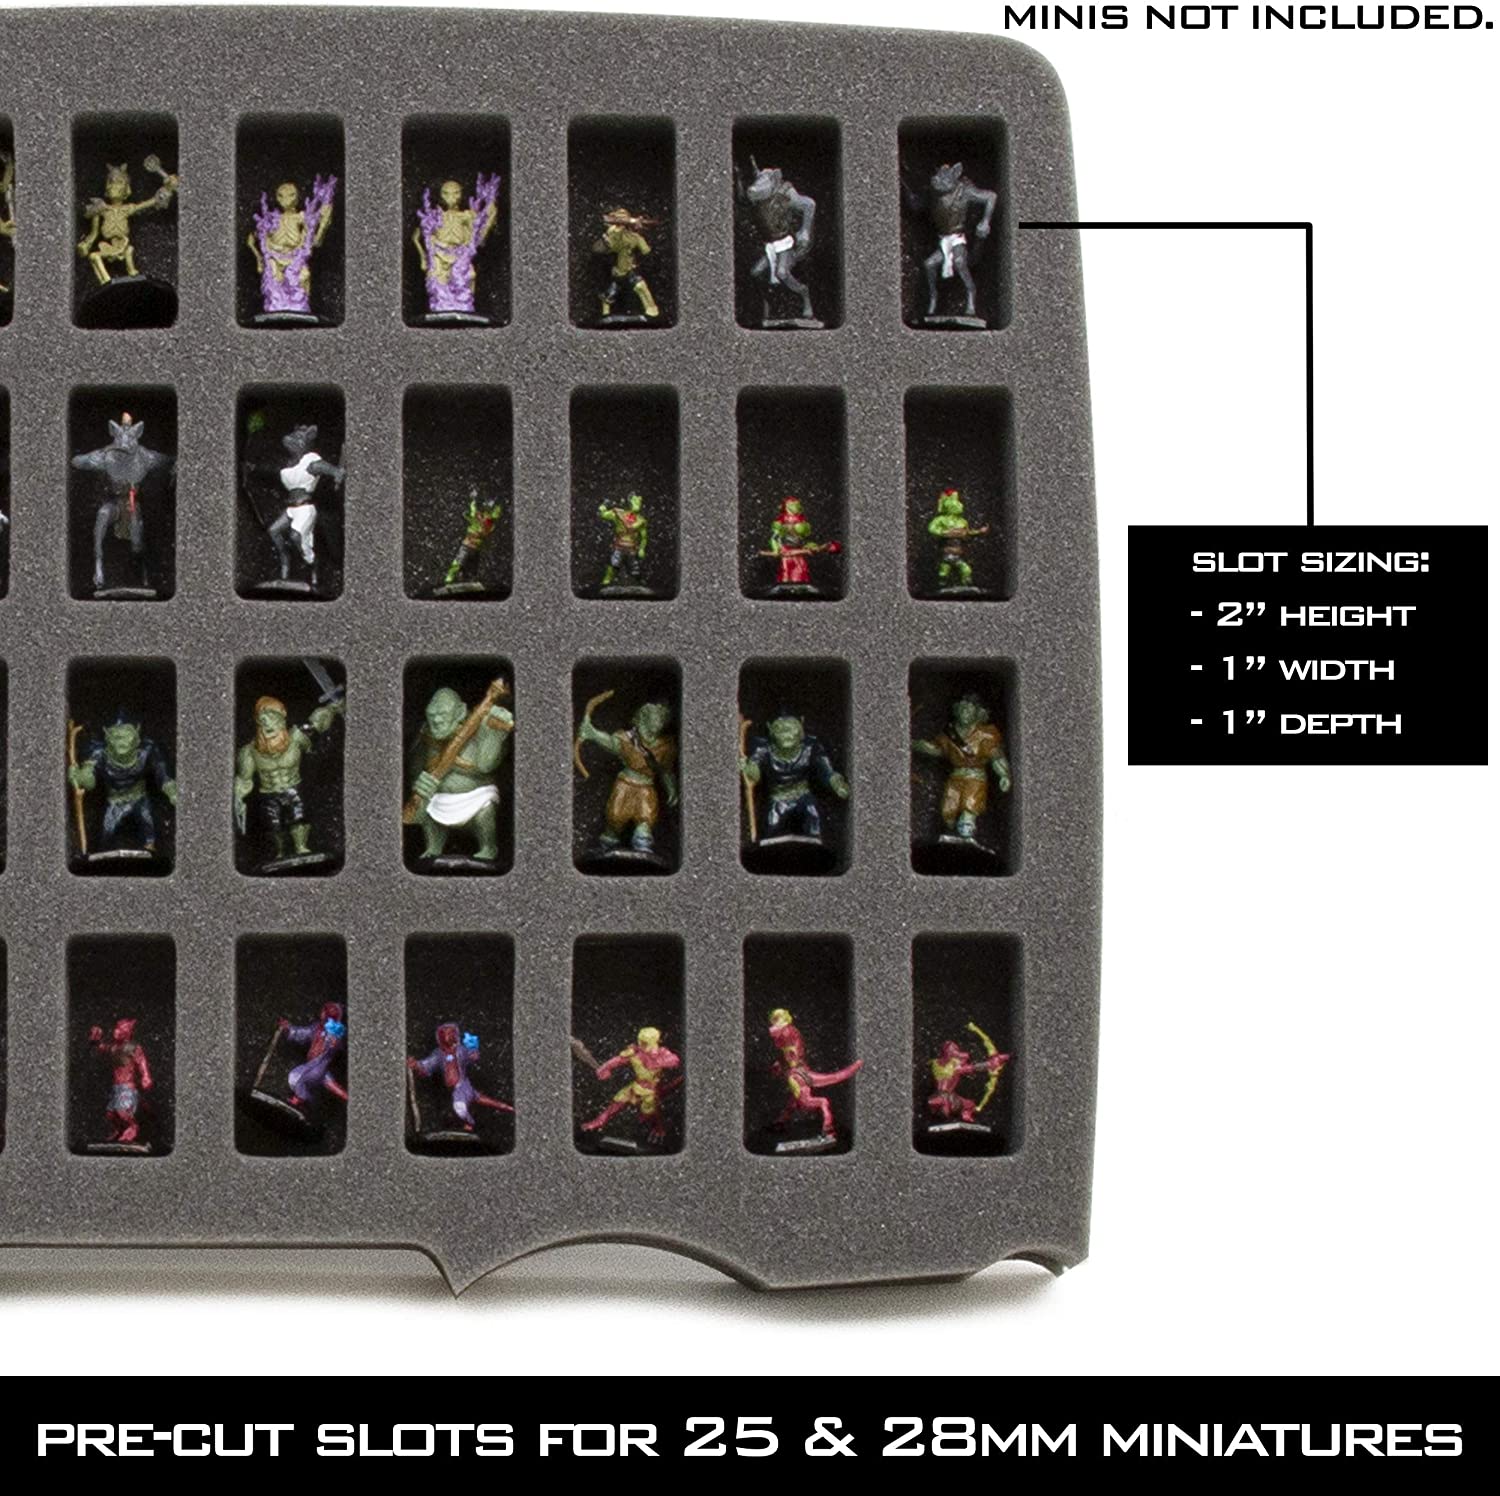 TPCY Miniature Storage Sturdy Carrying Figure Case -108 Slot Figurine  Minature Carrying Case,Compatible with Warhammer 40k, Dungeons & Dragons  and